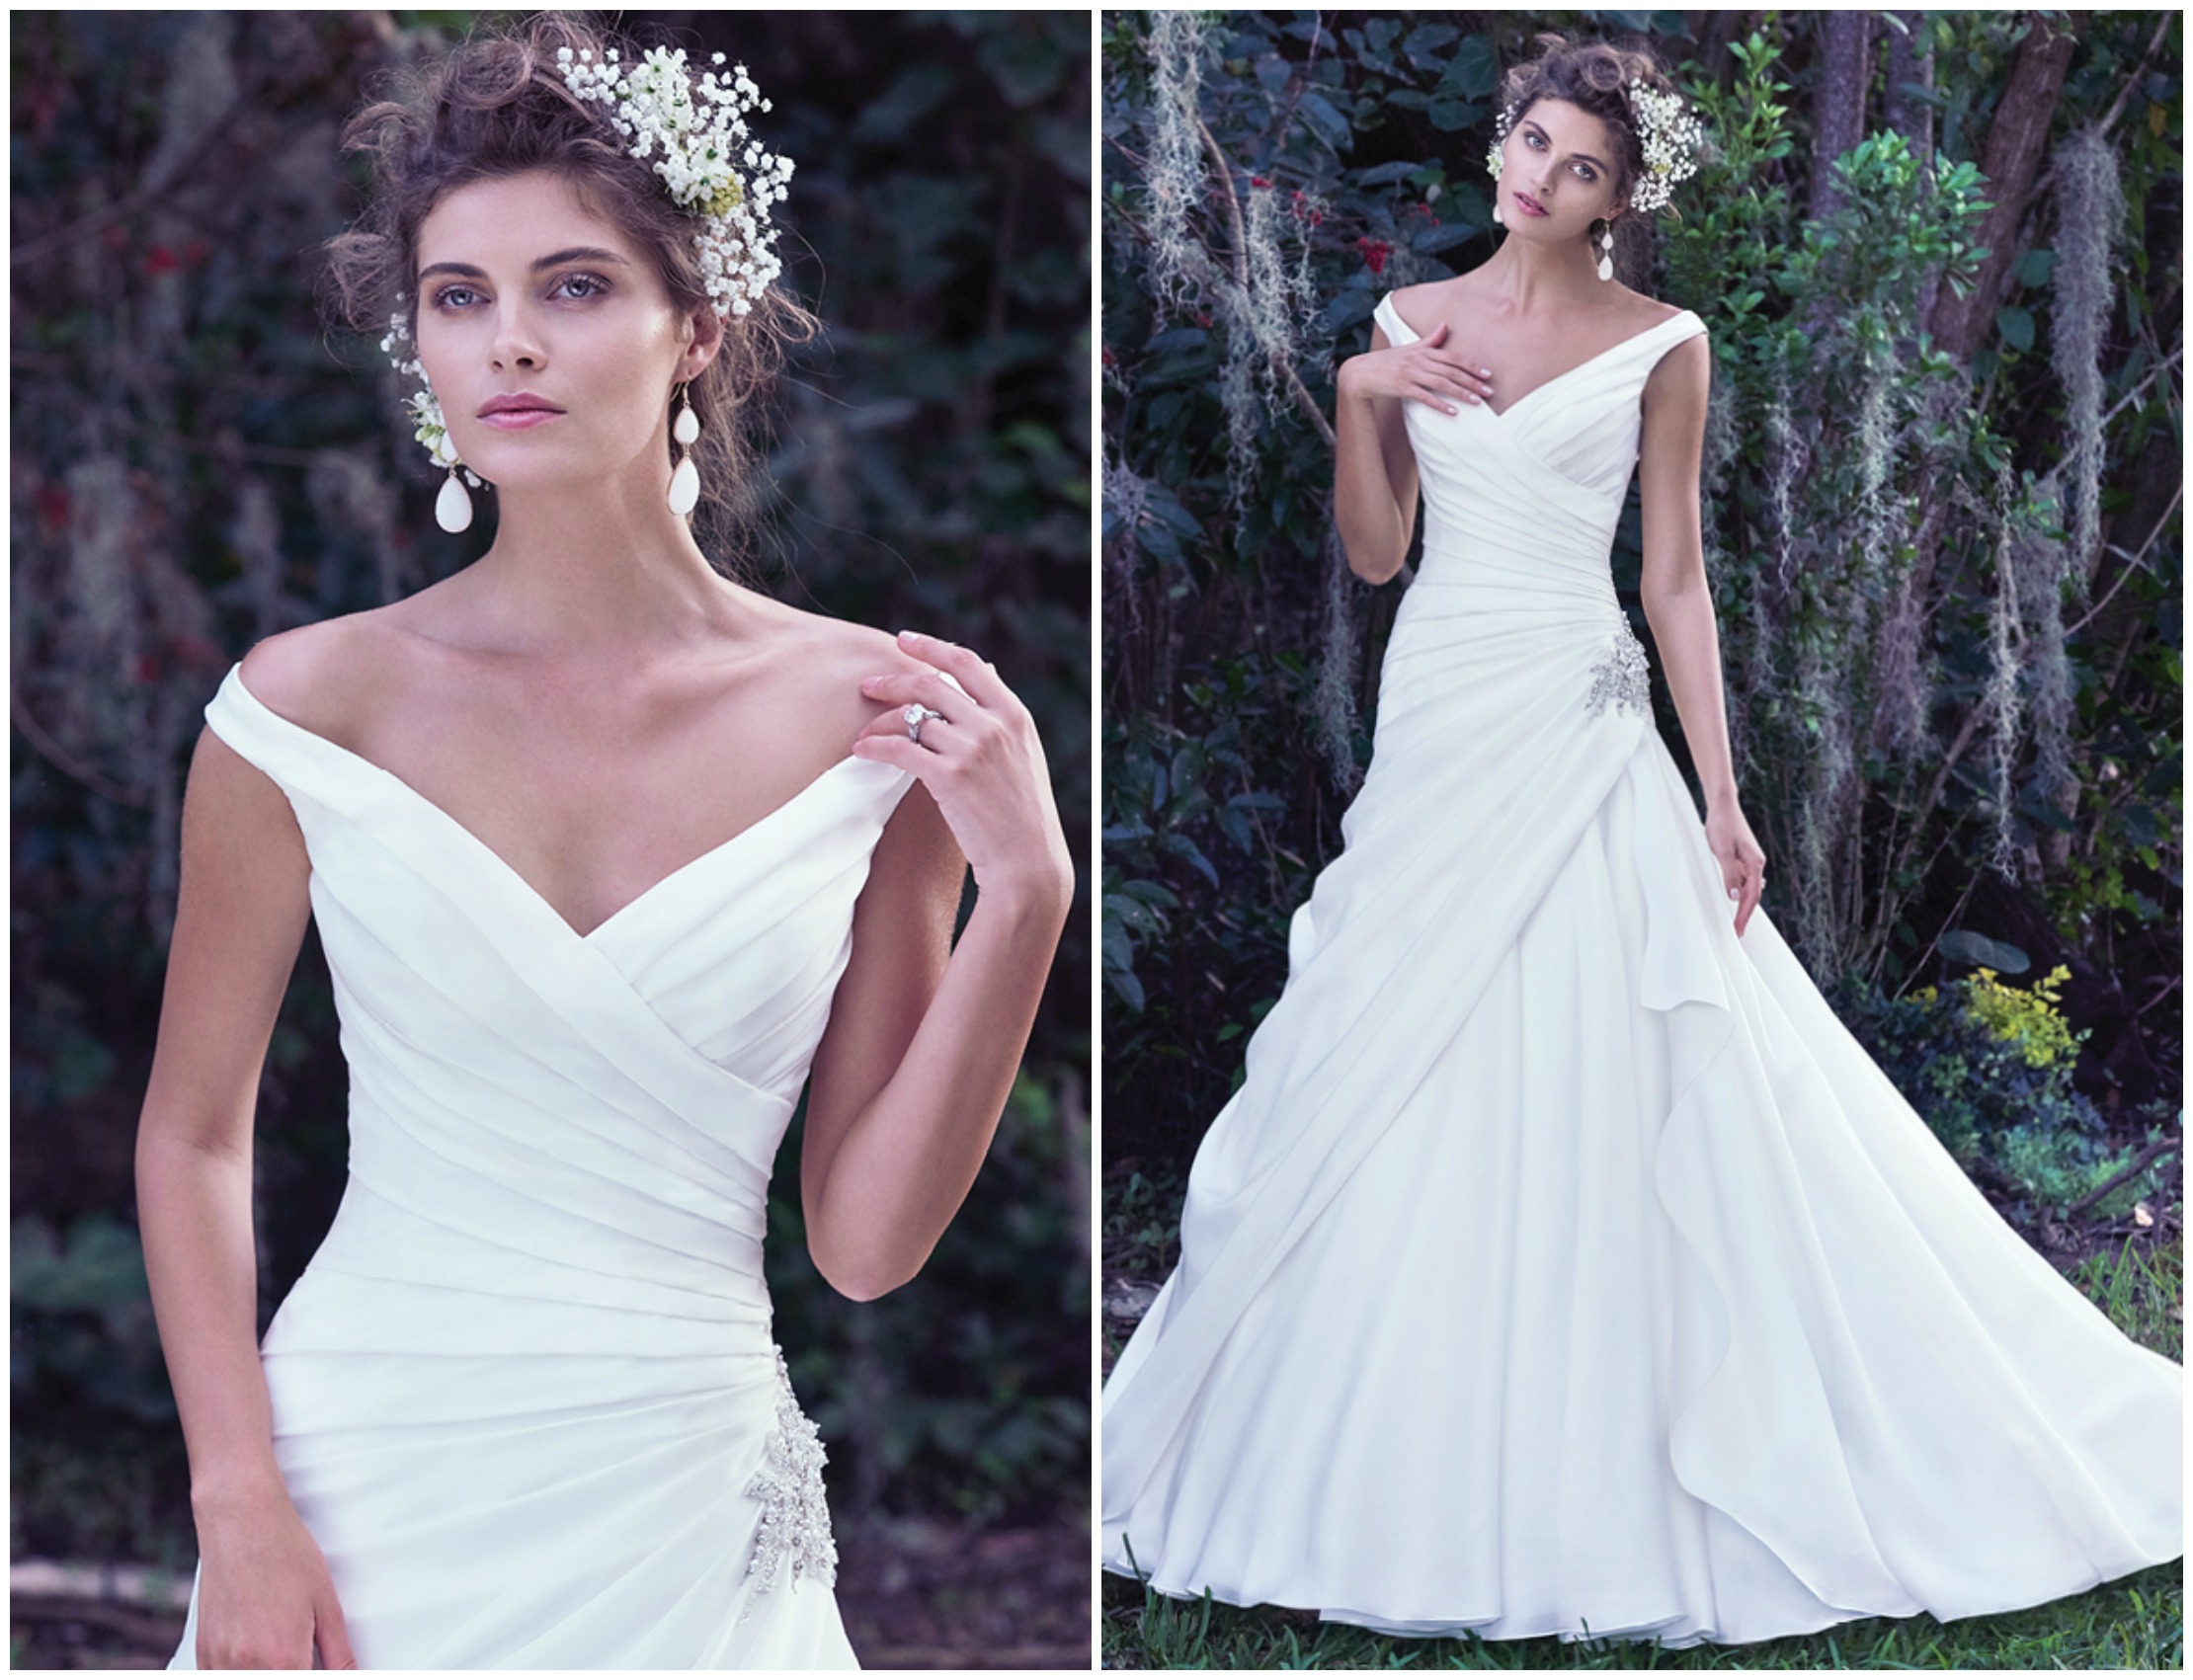 This Atlie organza A-line wedding dress exudes femininity with a romantic portrait neckline. Added elegance is found in the asymmetrical pleated bodice, accented by sparkling Swarovski crystal embellishment at the hip. Finished with corset closure. 

<a href="https://www.maggiesottero.com/maggie-sottero/harper/9765" target="_blank">Maggie Sottero</a>